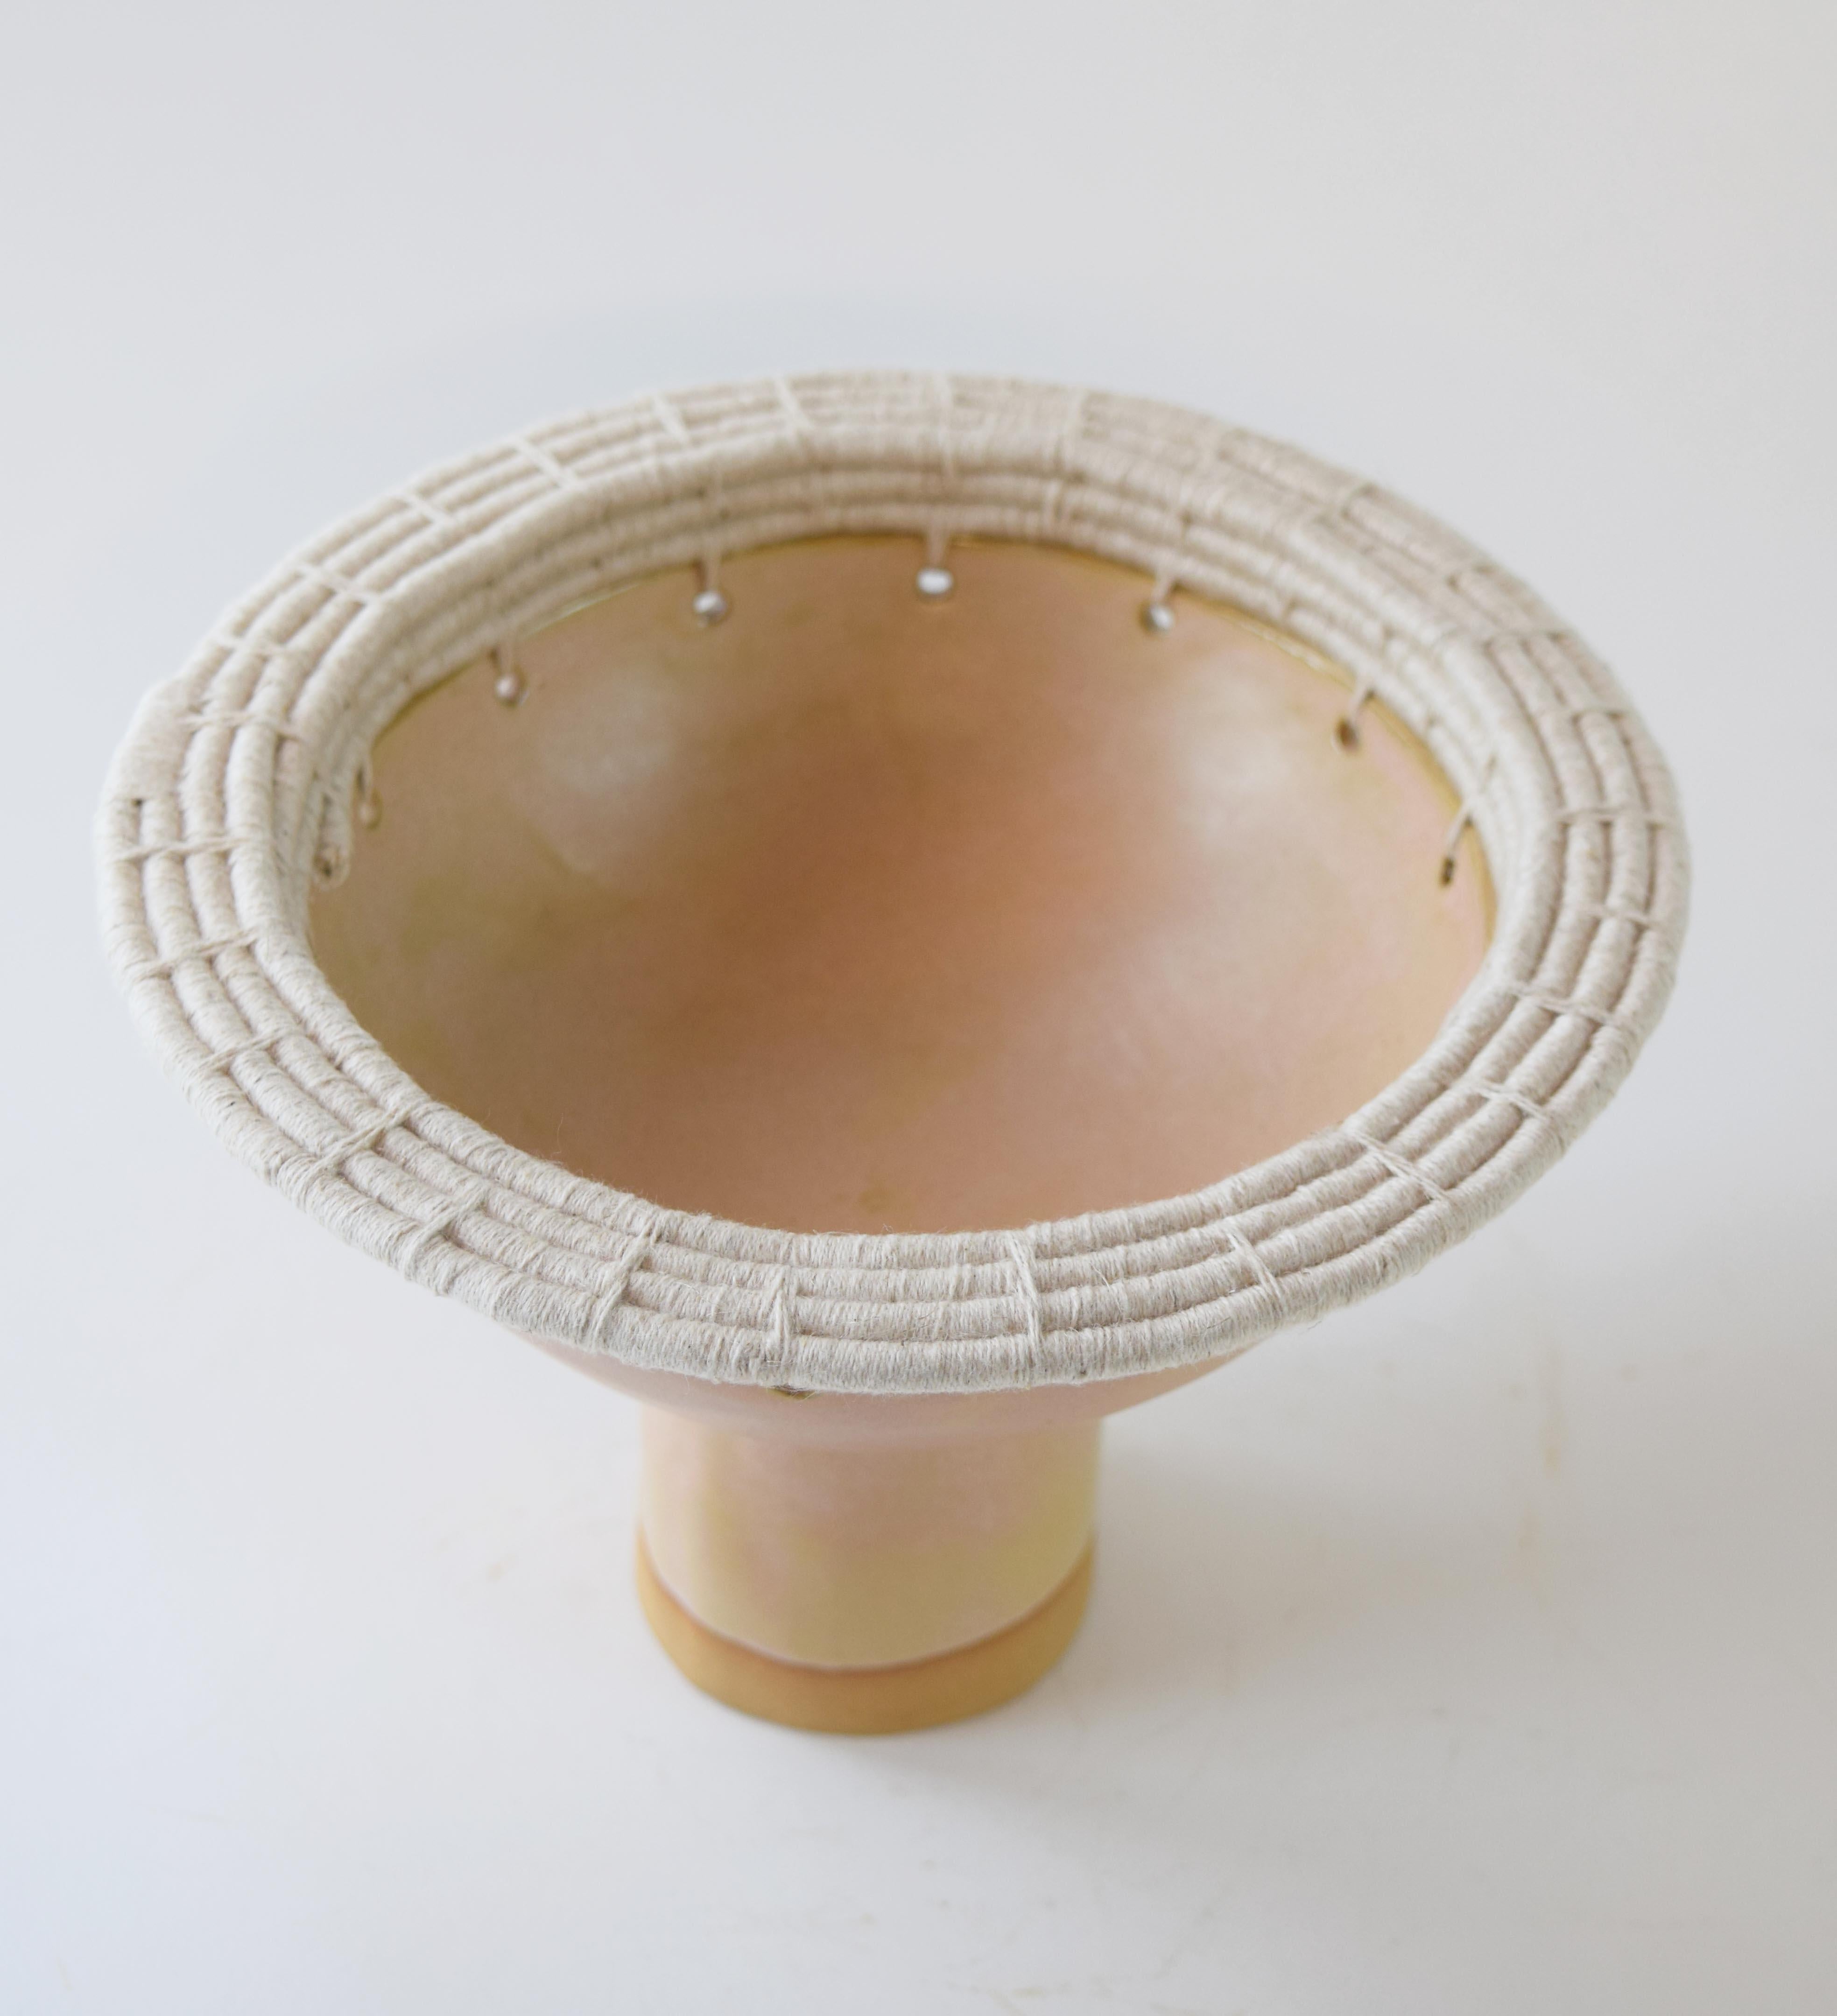 Hand formed stoneware bowl with tan glaze. Woven natural cotton edge detail. For decorative use only.

8.5”W x 6”H

One of a kind collections are released periodically throughout the year. Each piece is meticulously crafted by Karen in her